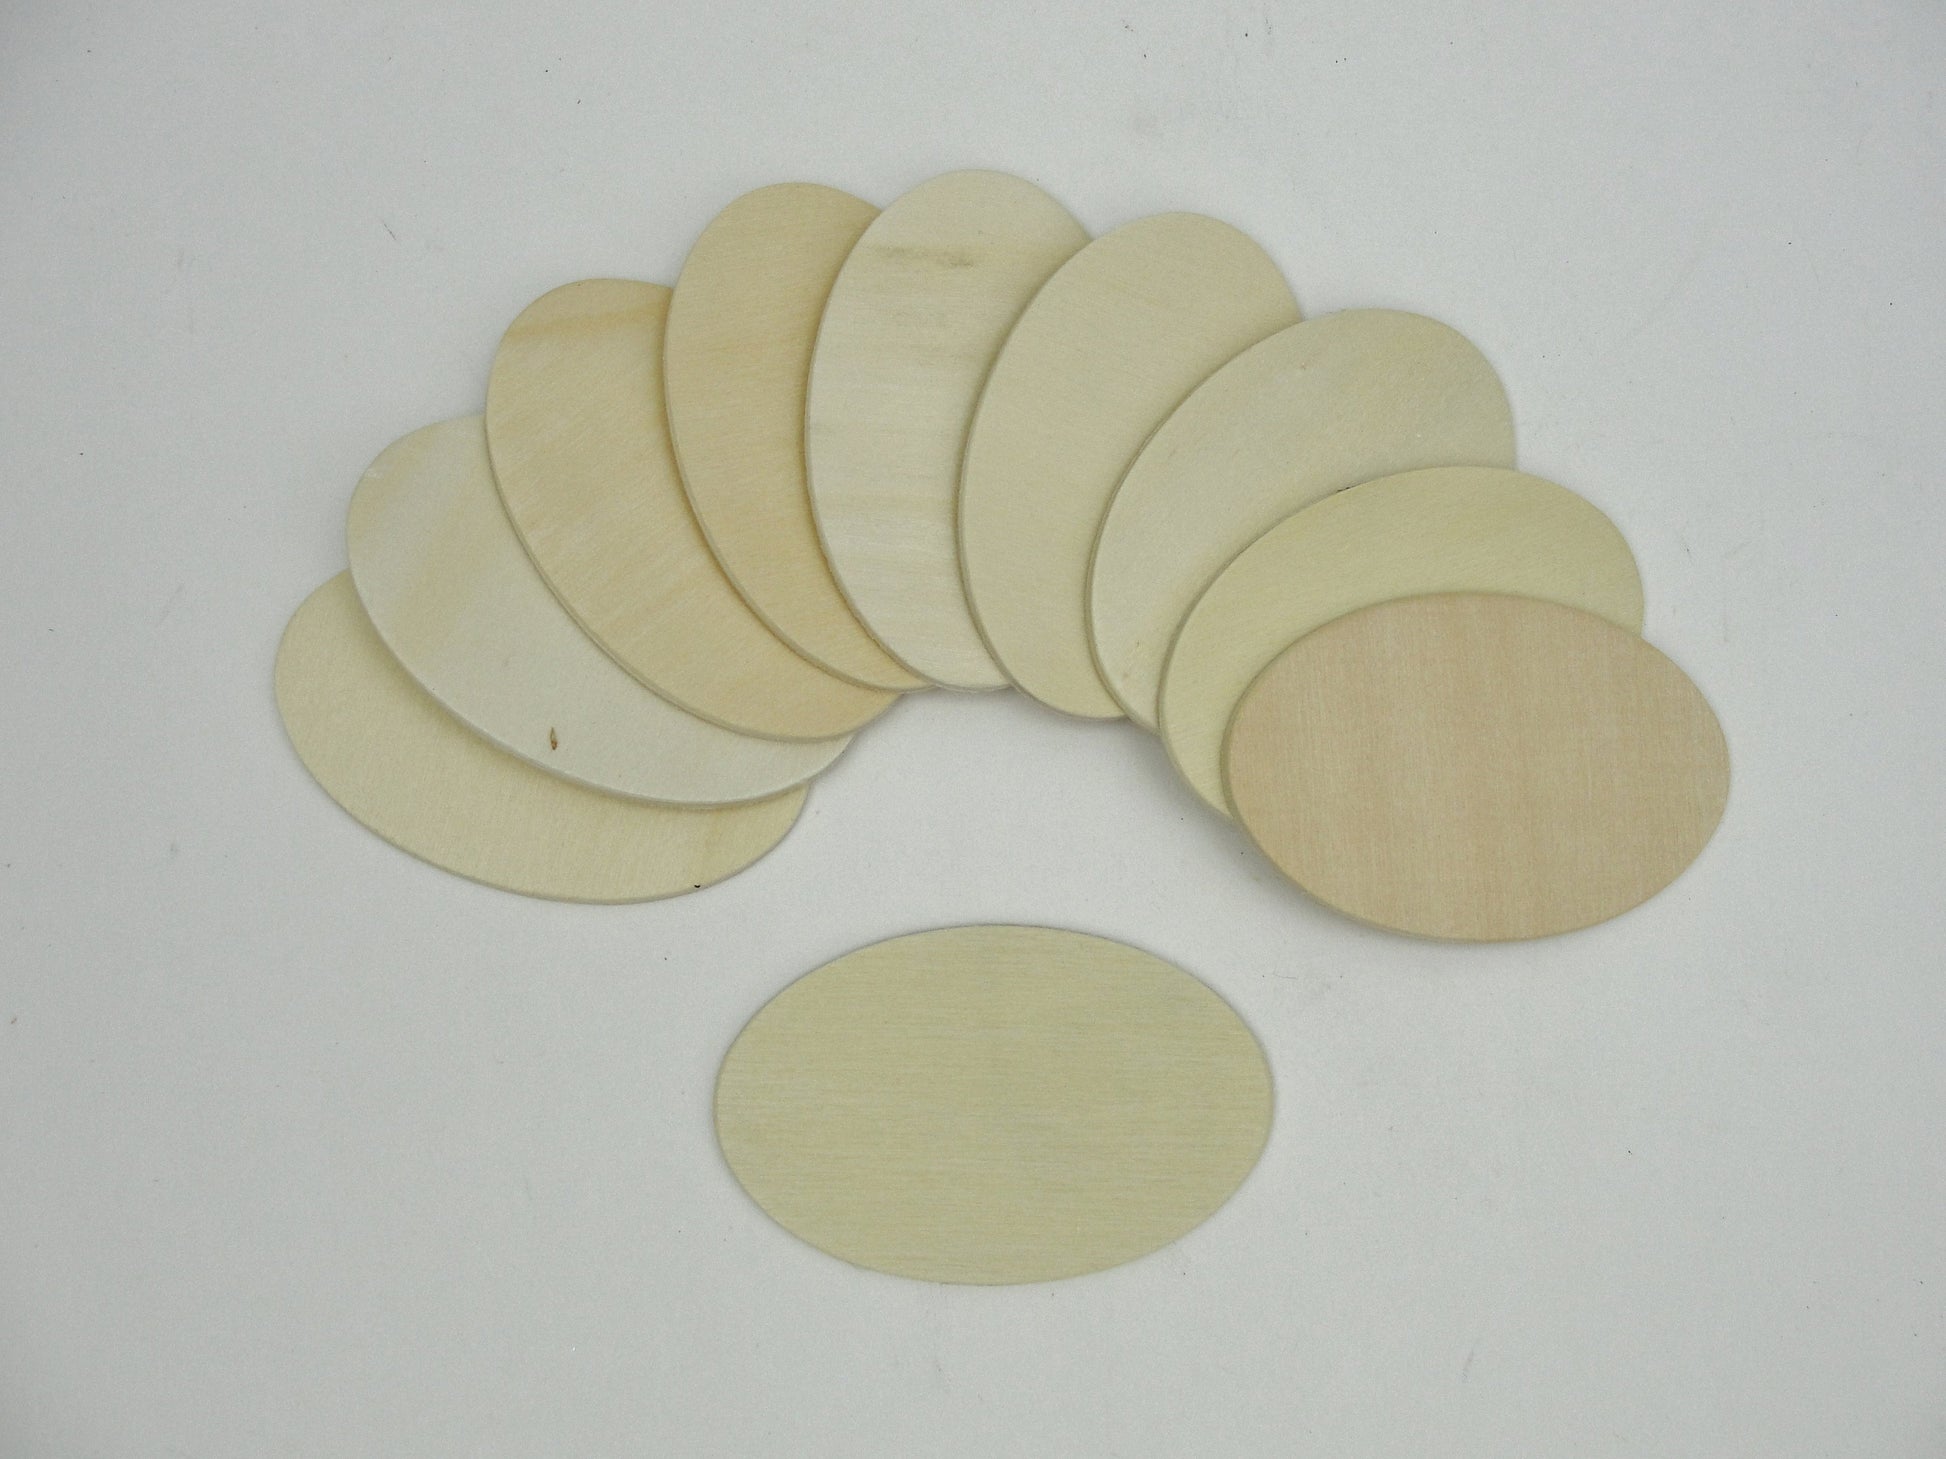 Wood oval disc 2 3/4" x 1 3/4" set of 10 - Wood parts - Craft Supply House